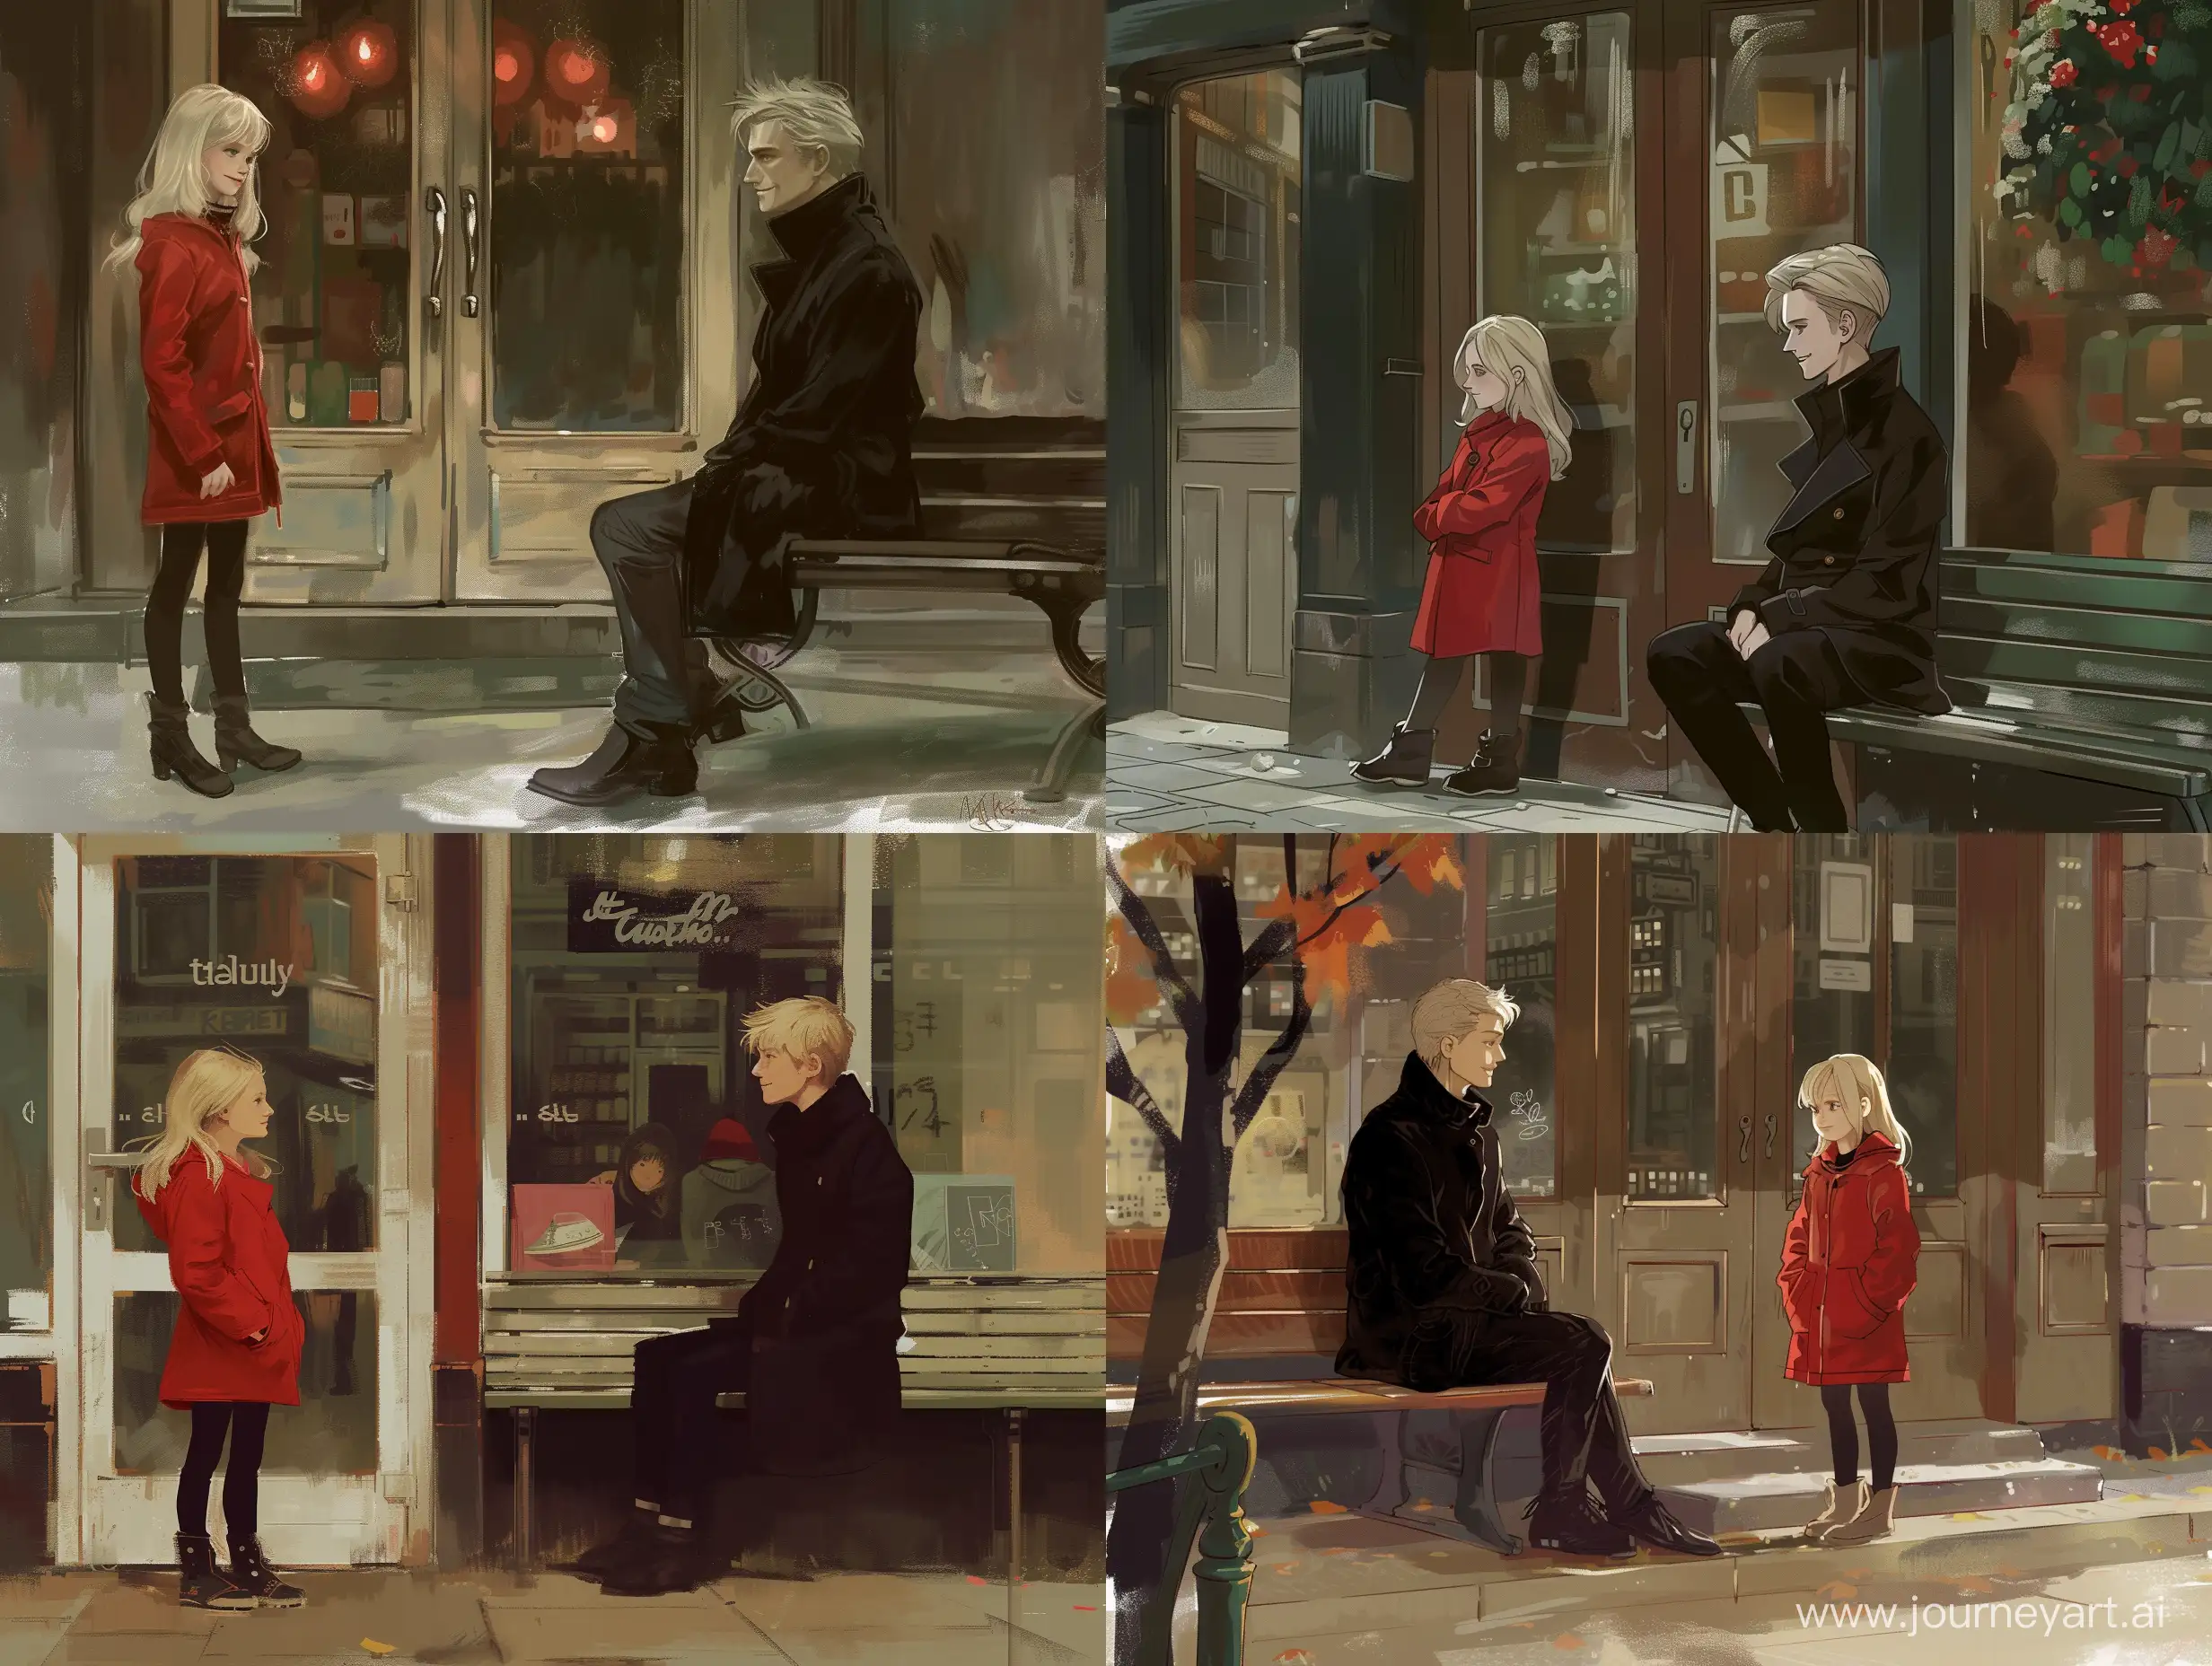 Blonde-Girl-and-Handsome-Guy-Waiting-Outside-Store